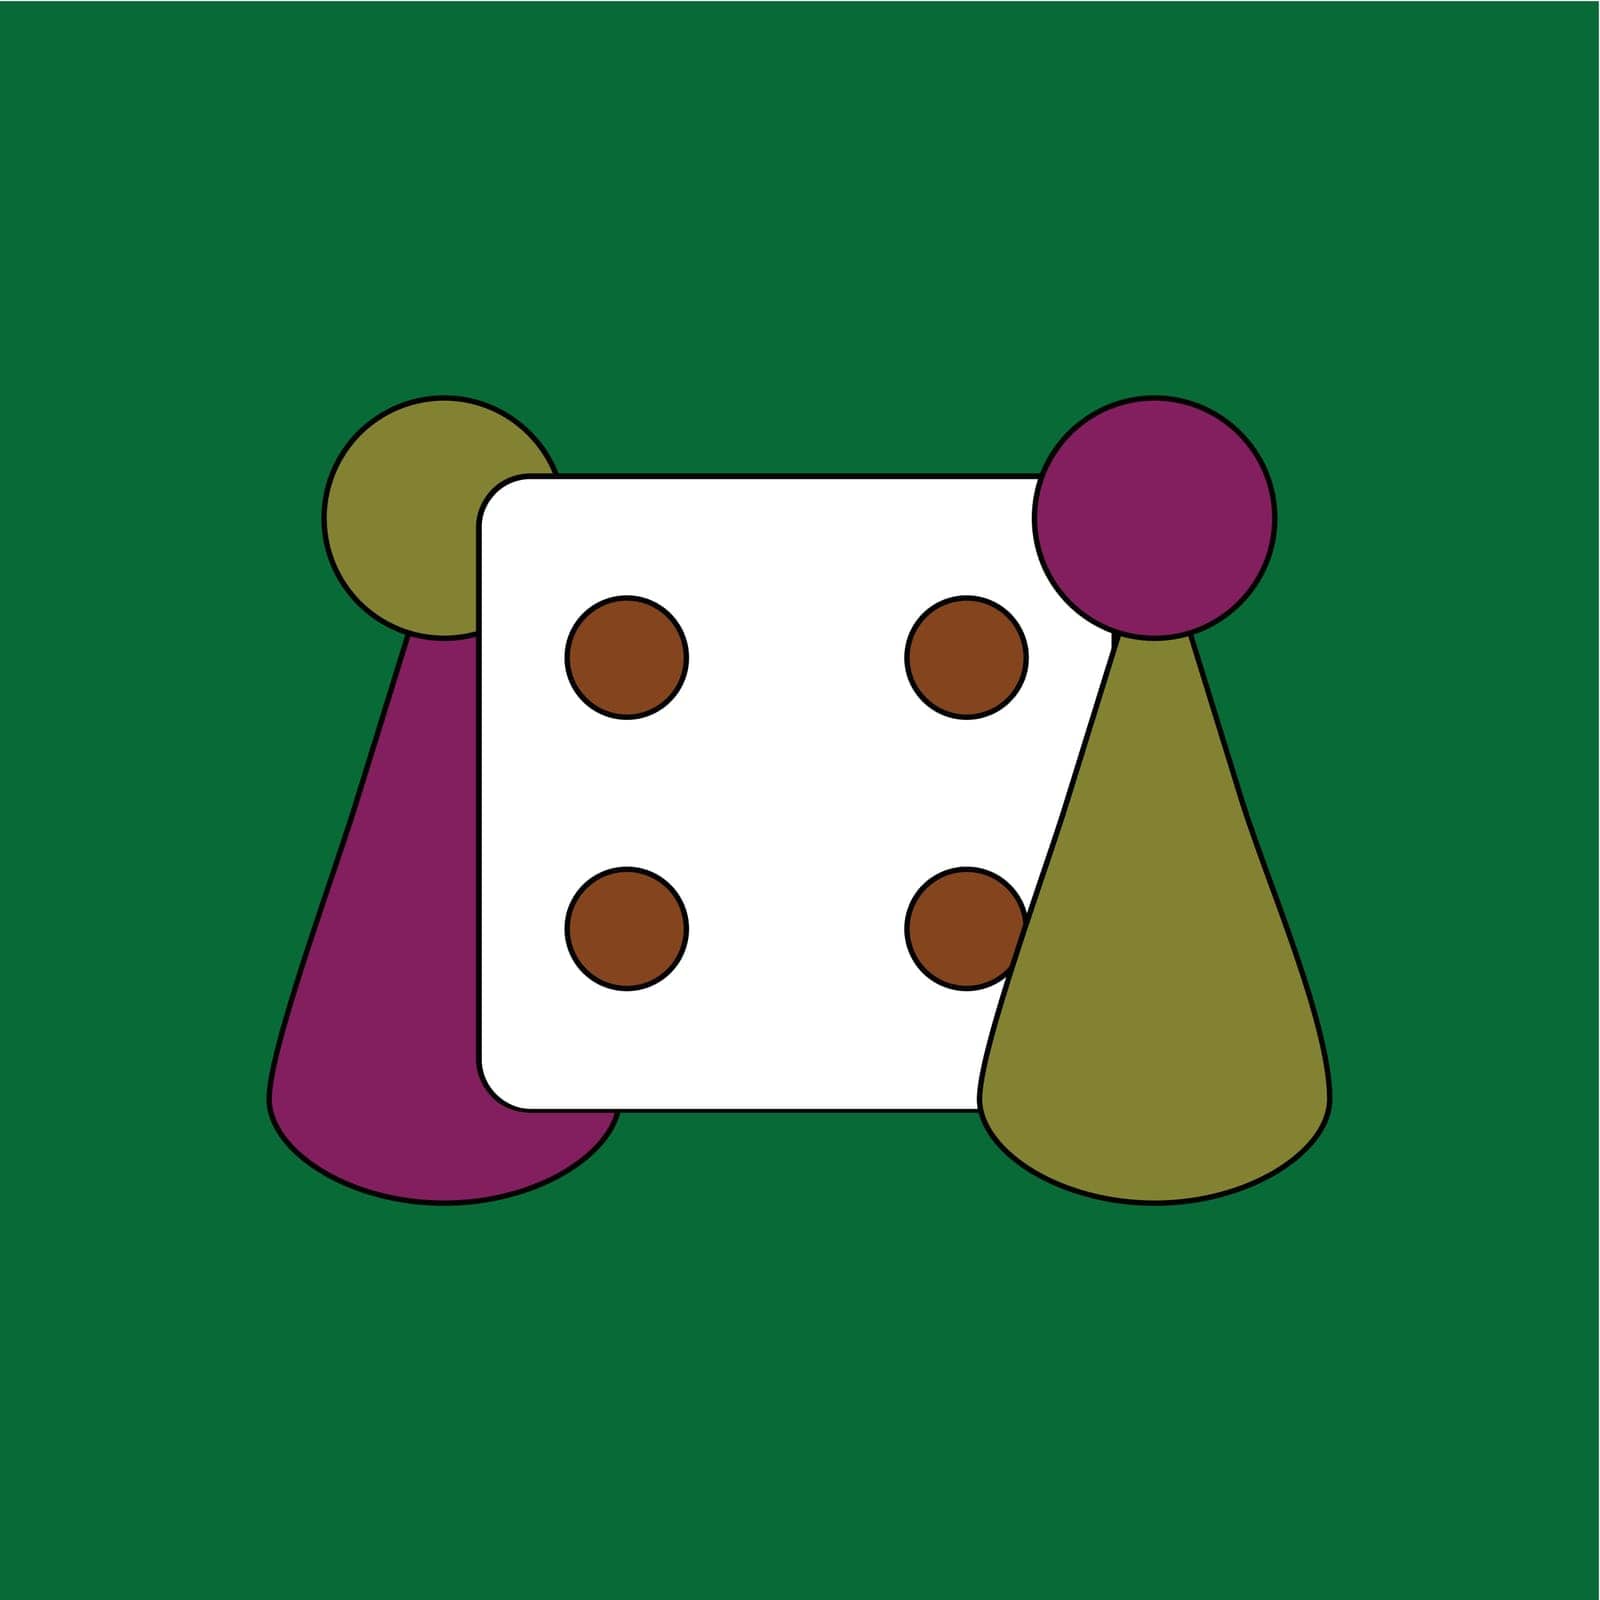 play,symbol,game,activity,icon,dice,loss,flat,design,plan,win,leisure,table,group,toy,spinner,figure,fortune,gamble,pastime,lose,team,collection,piece,success,pawn,debt,fun,board,child